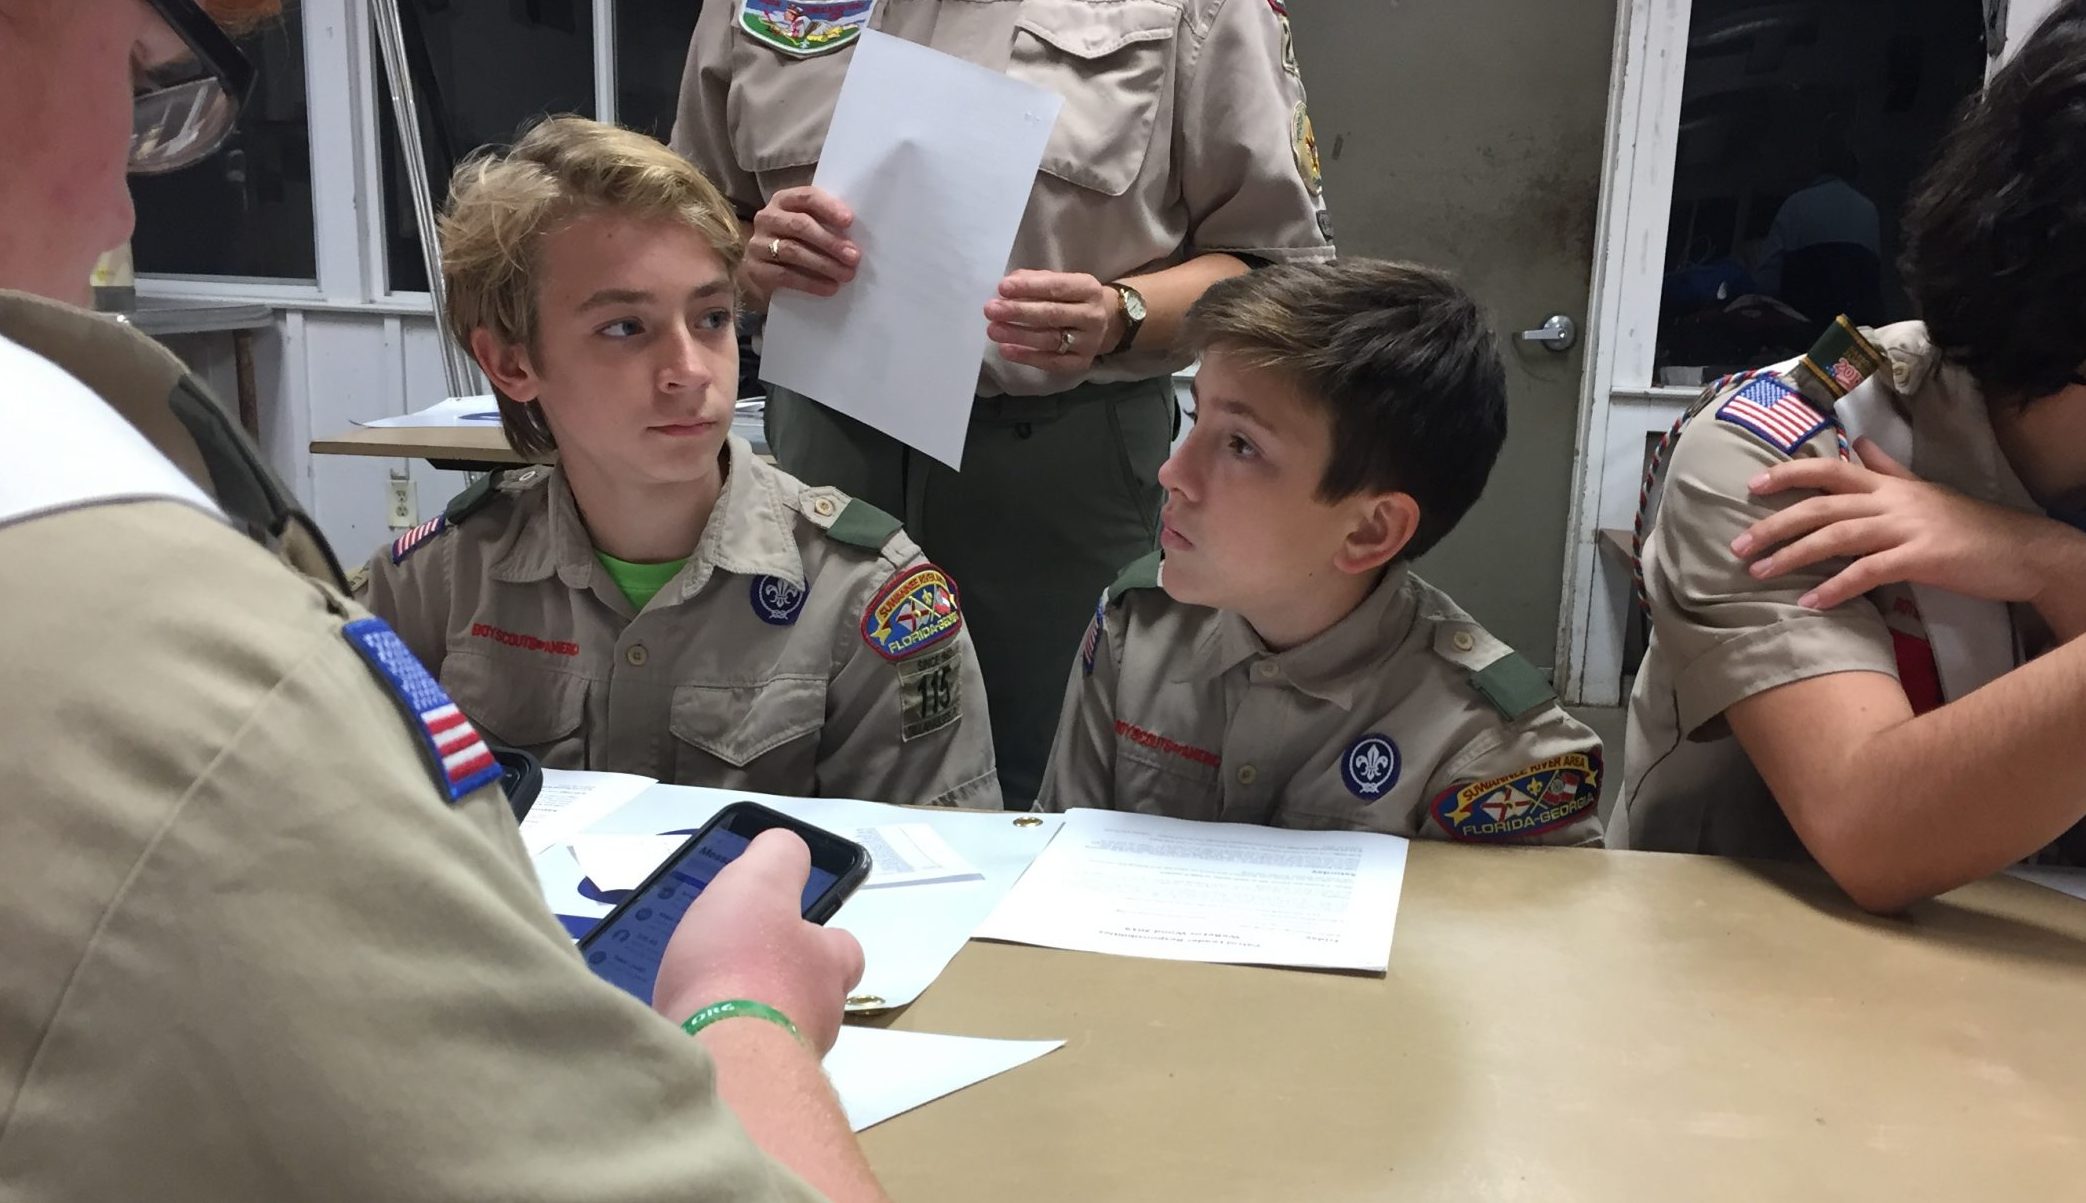 Scouts listening